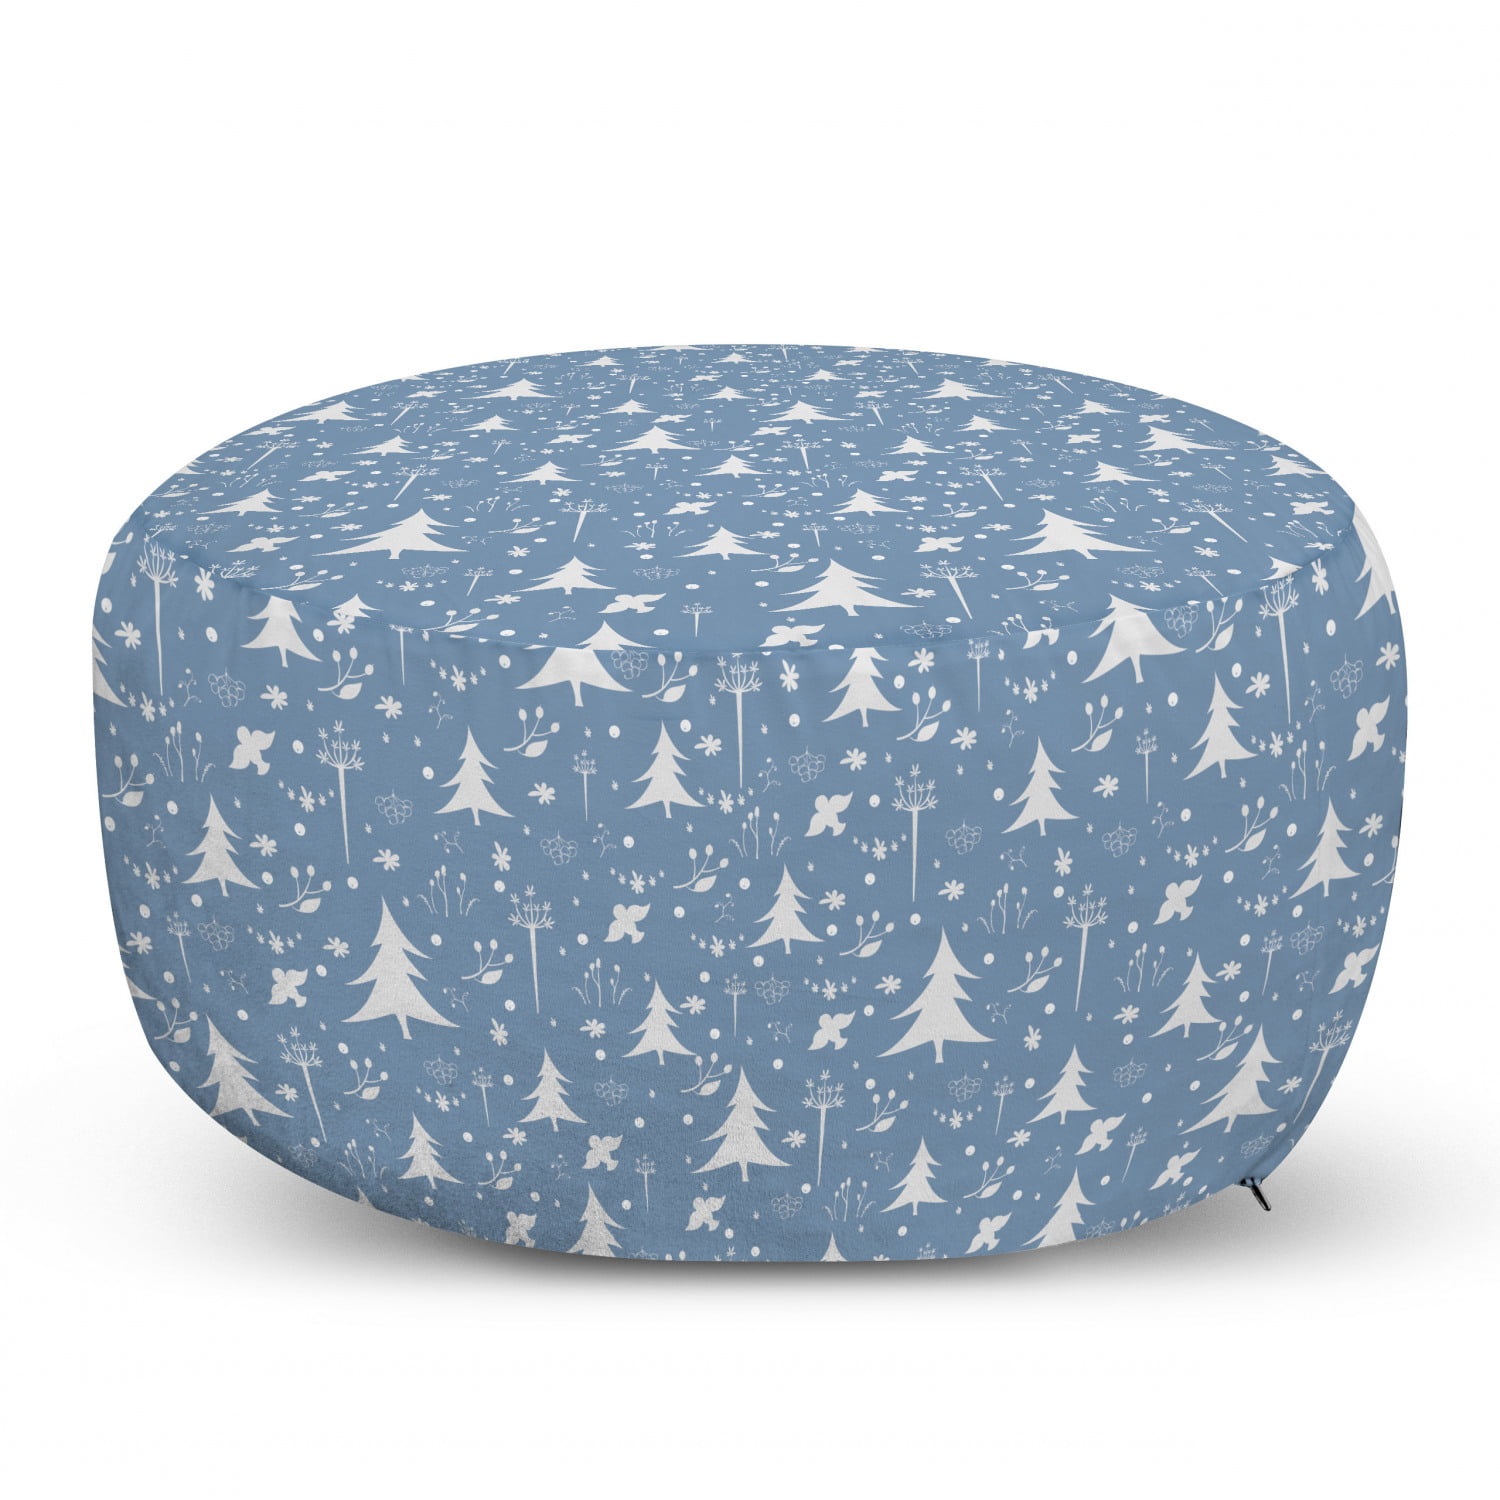 New Years Christmas Theme Winter Snow Gloves with Furry Borders Image Ambesonne Turquoise Ottoman Pouf White and Pale Blue Decorative Soft Foot Rest with Removable Cover Living Room and Bedroom